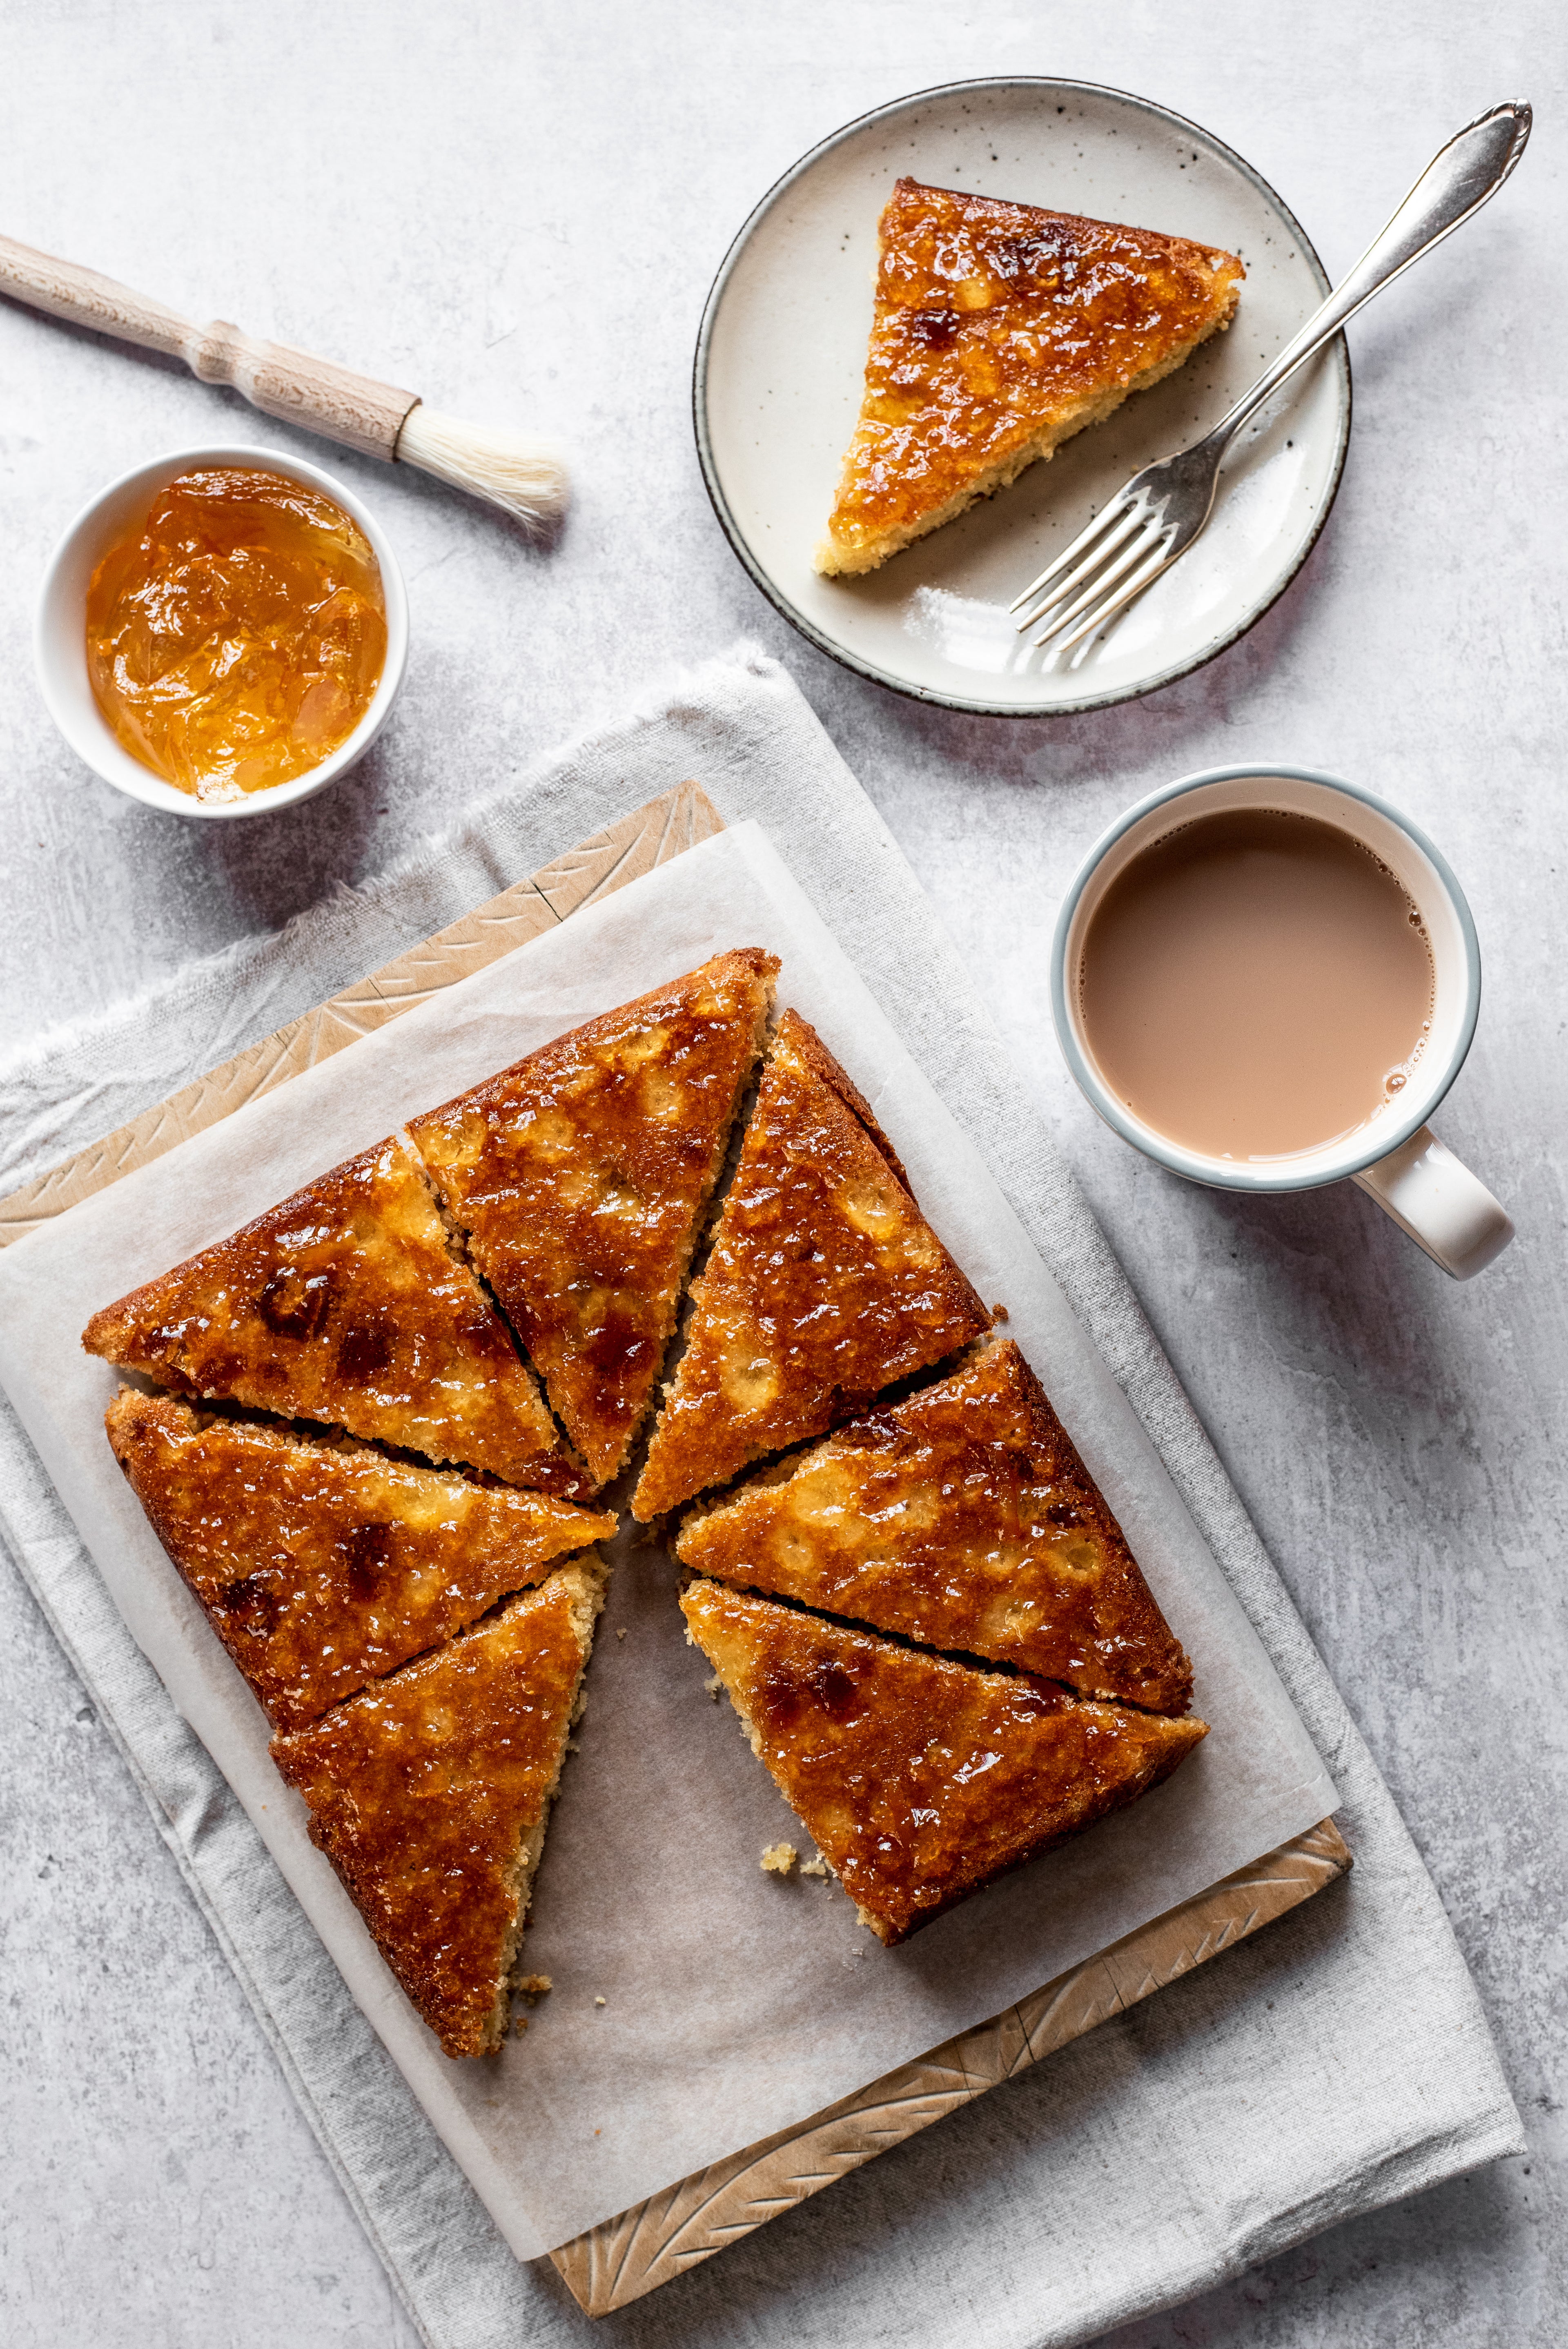 Top view of Marmalade Traybake sliced into pieces, on a sheet of baking paper, next to a cup of tea and a bowl of marmalade